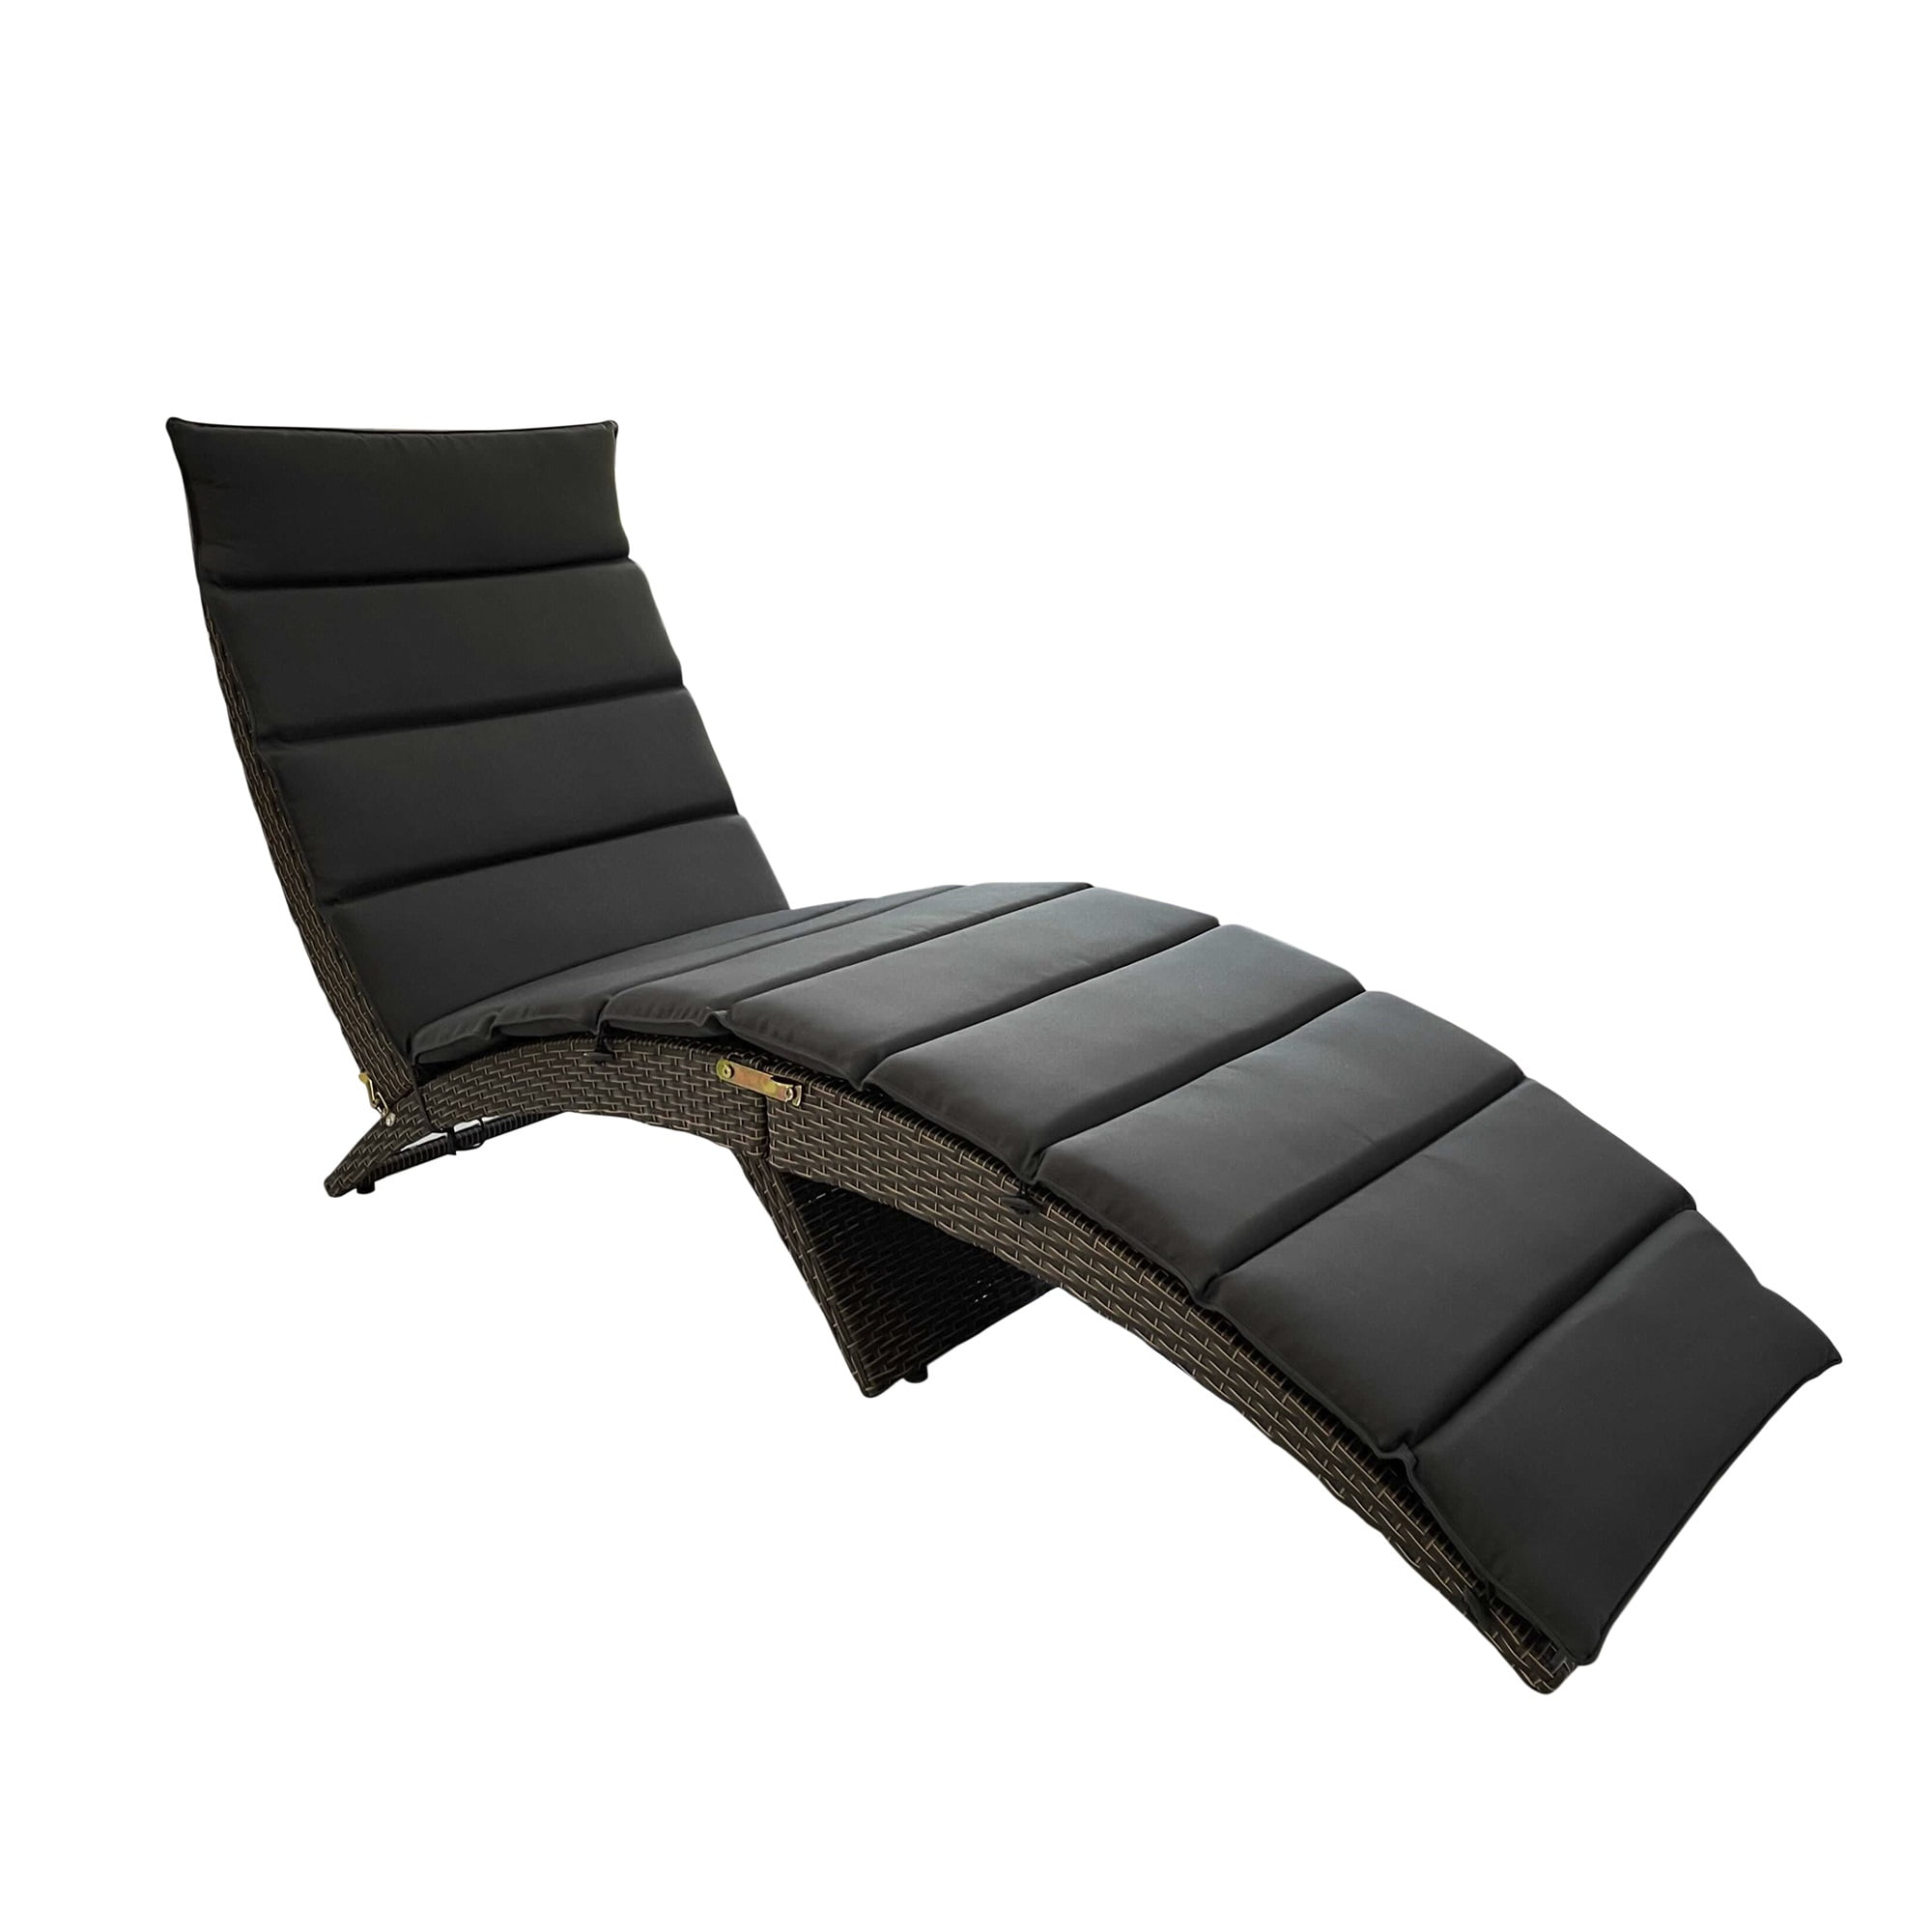 Alameda Indoor/Outdoor Patio Wicker Chaise Lounge with Dark Grey Polyester Cushion